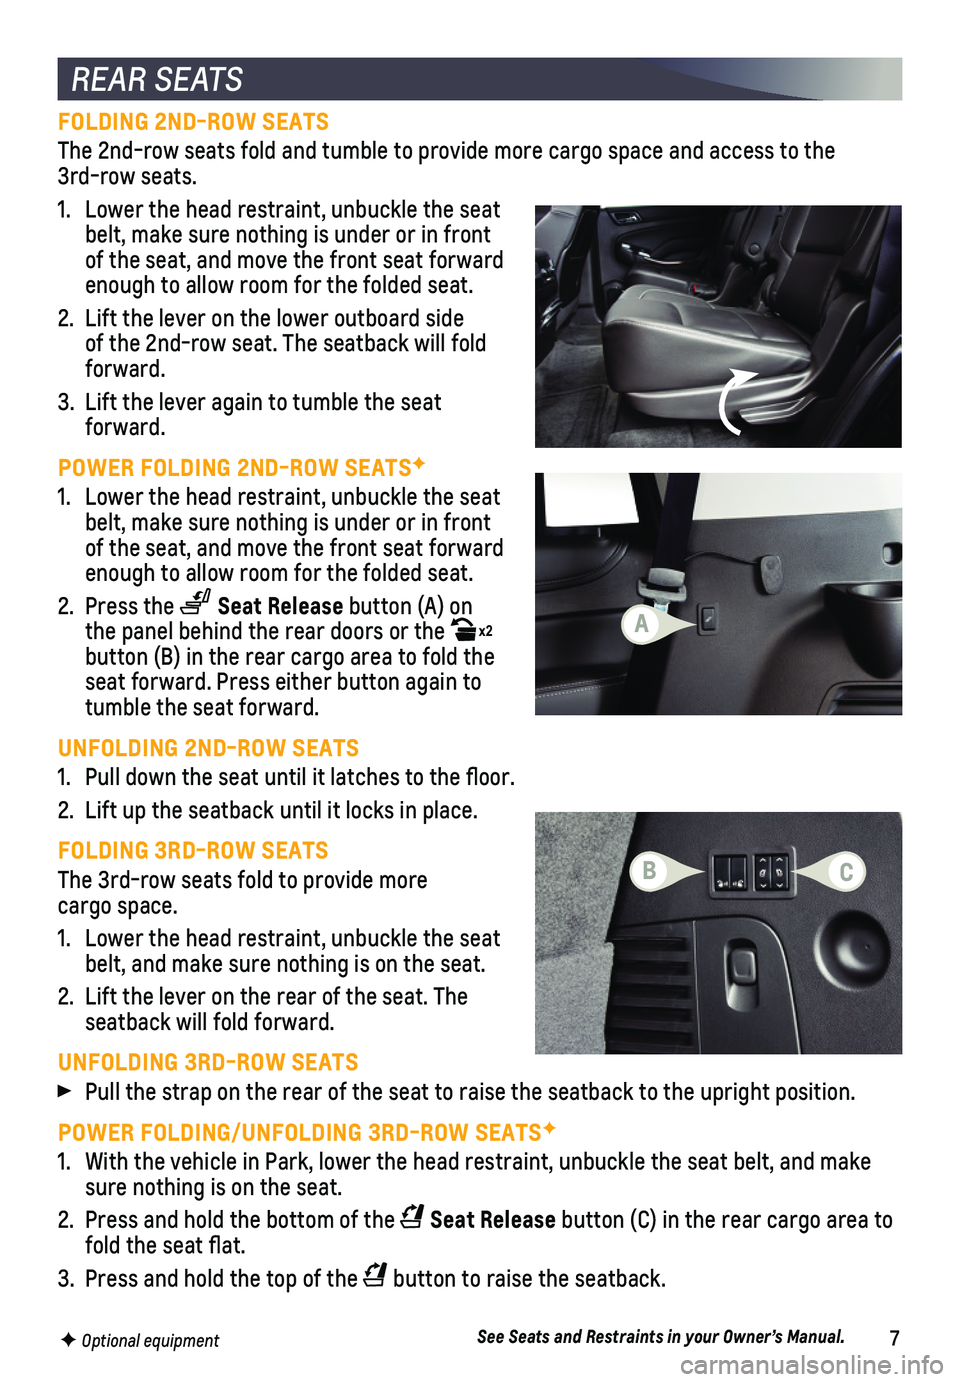 CHEVROLET TAHOE 2019  Get To Know Guide 7
FOLDING 2ND-ROW SEATS
The 2nd-row seats fold and tumble to provide more cargo space and access\
 to the  3rd-row seats.
1. Lower the head restraint, unbuckle the seat belt, make sure nothing is unde